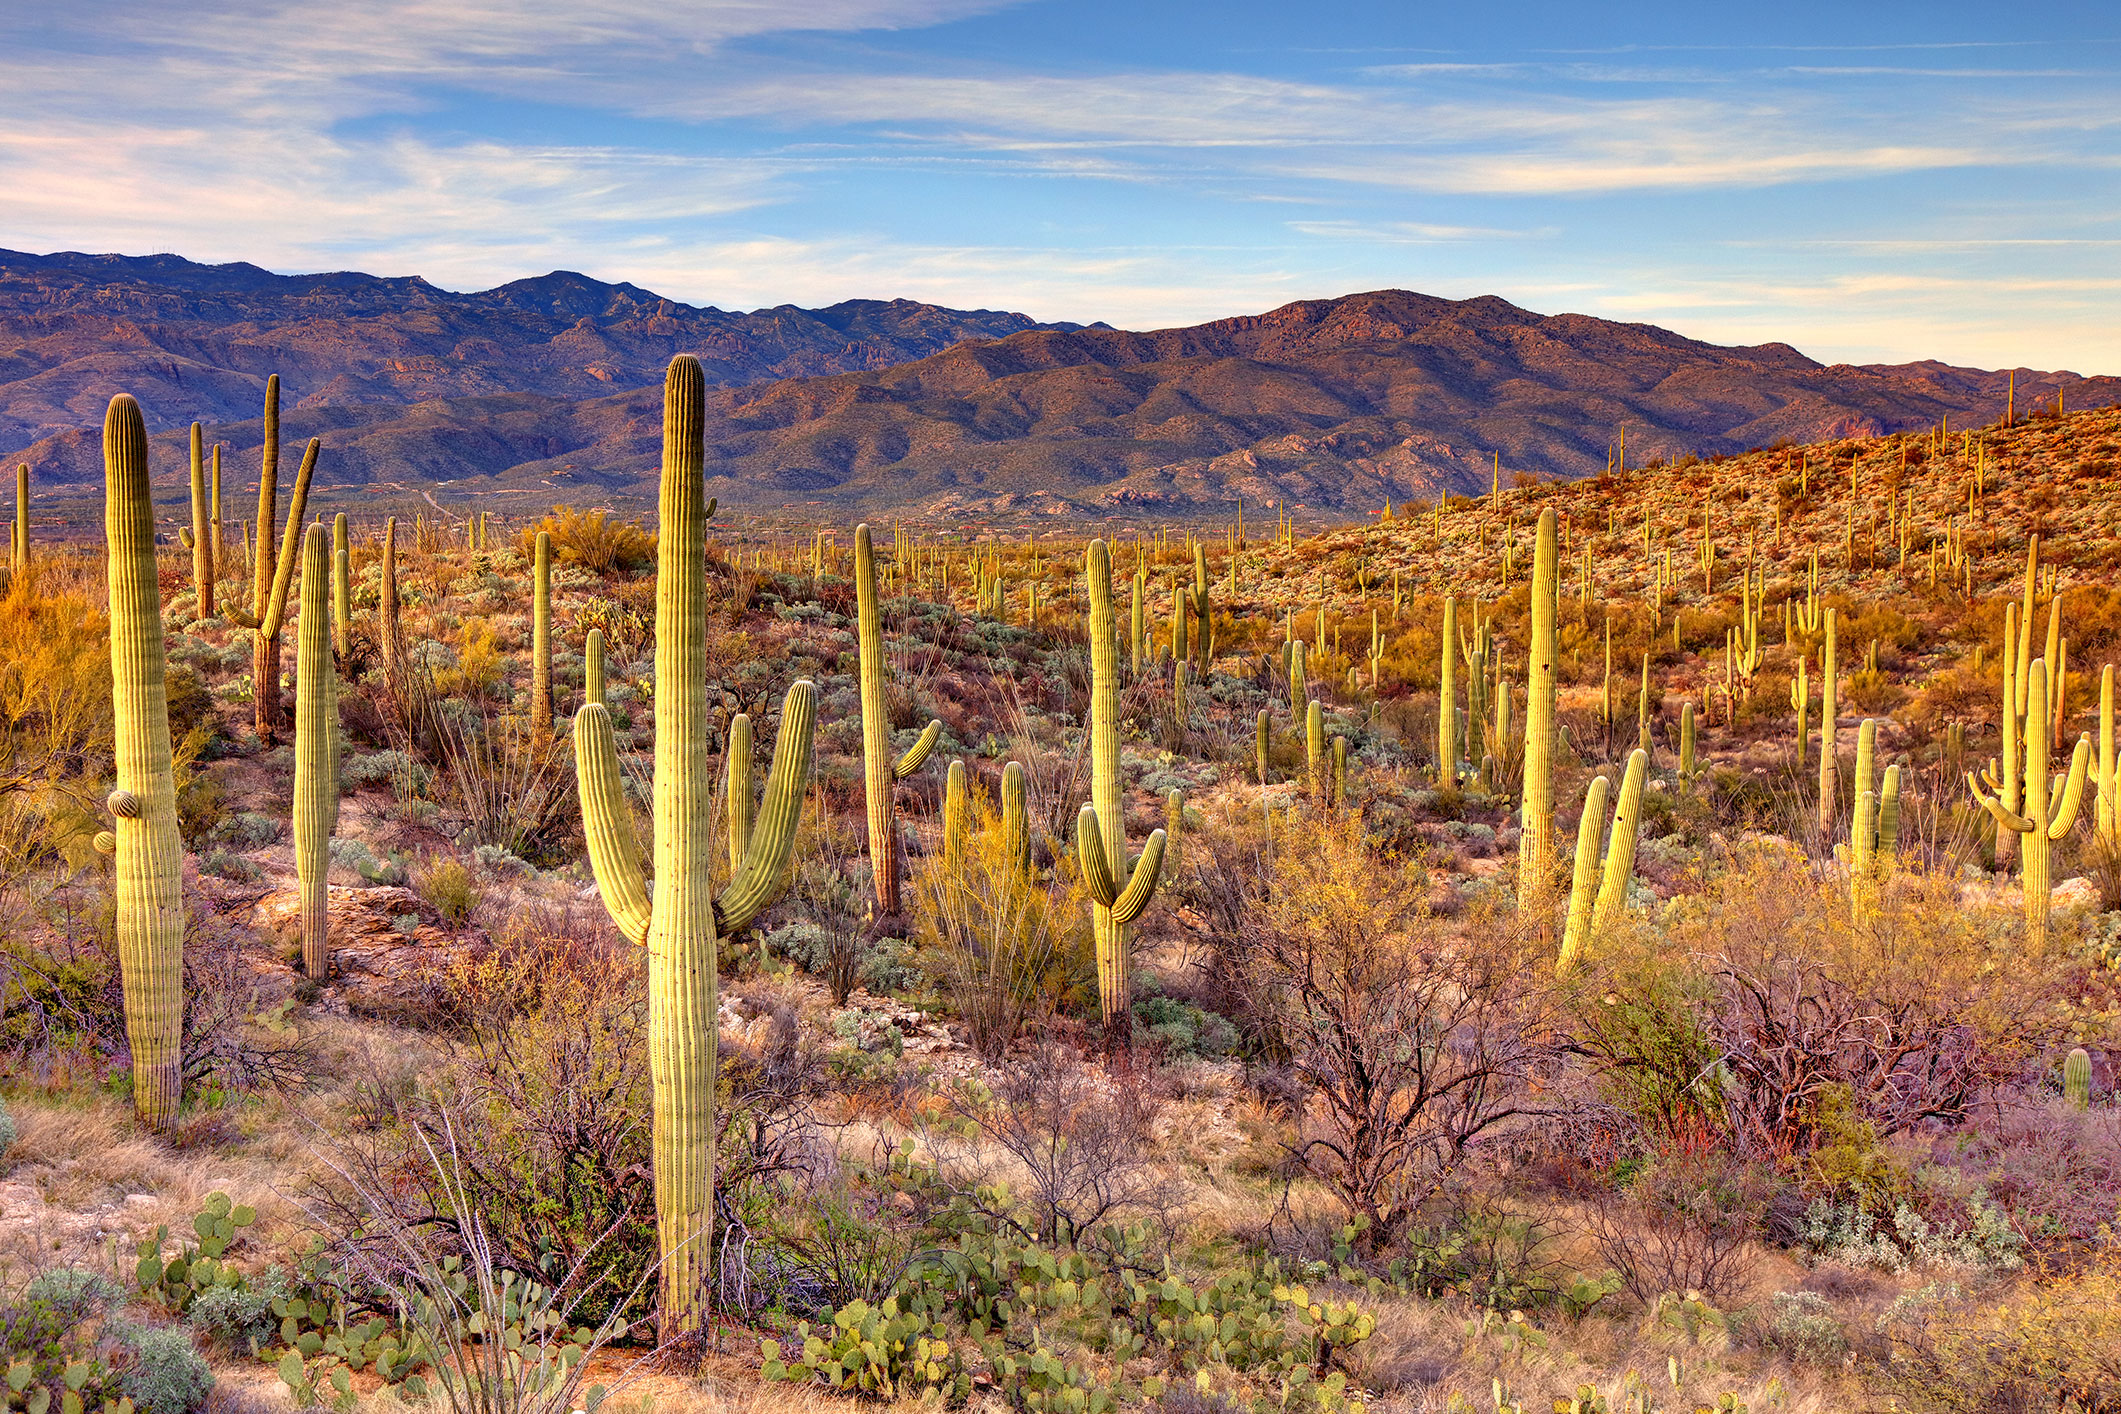 A photo of saguaro cacti growing in a rugged landscape